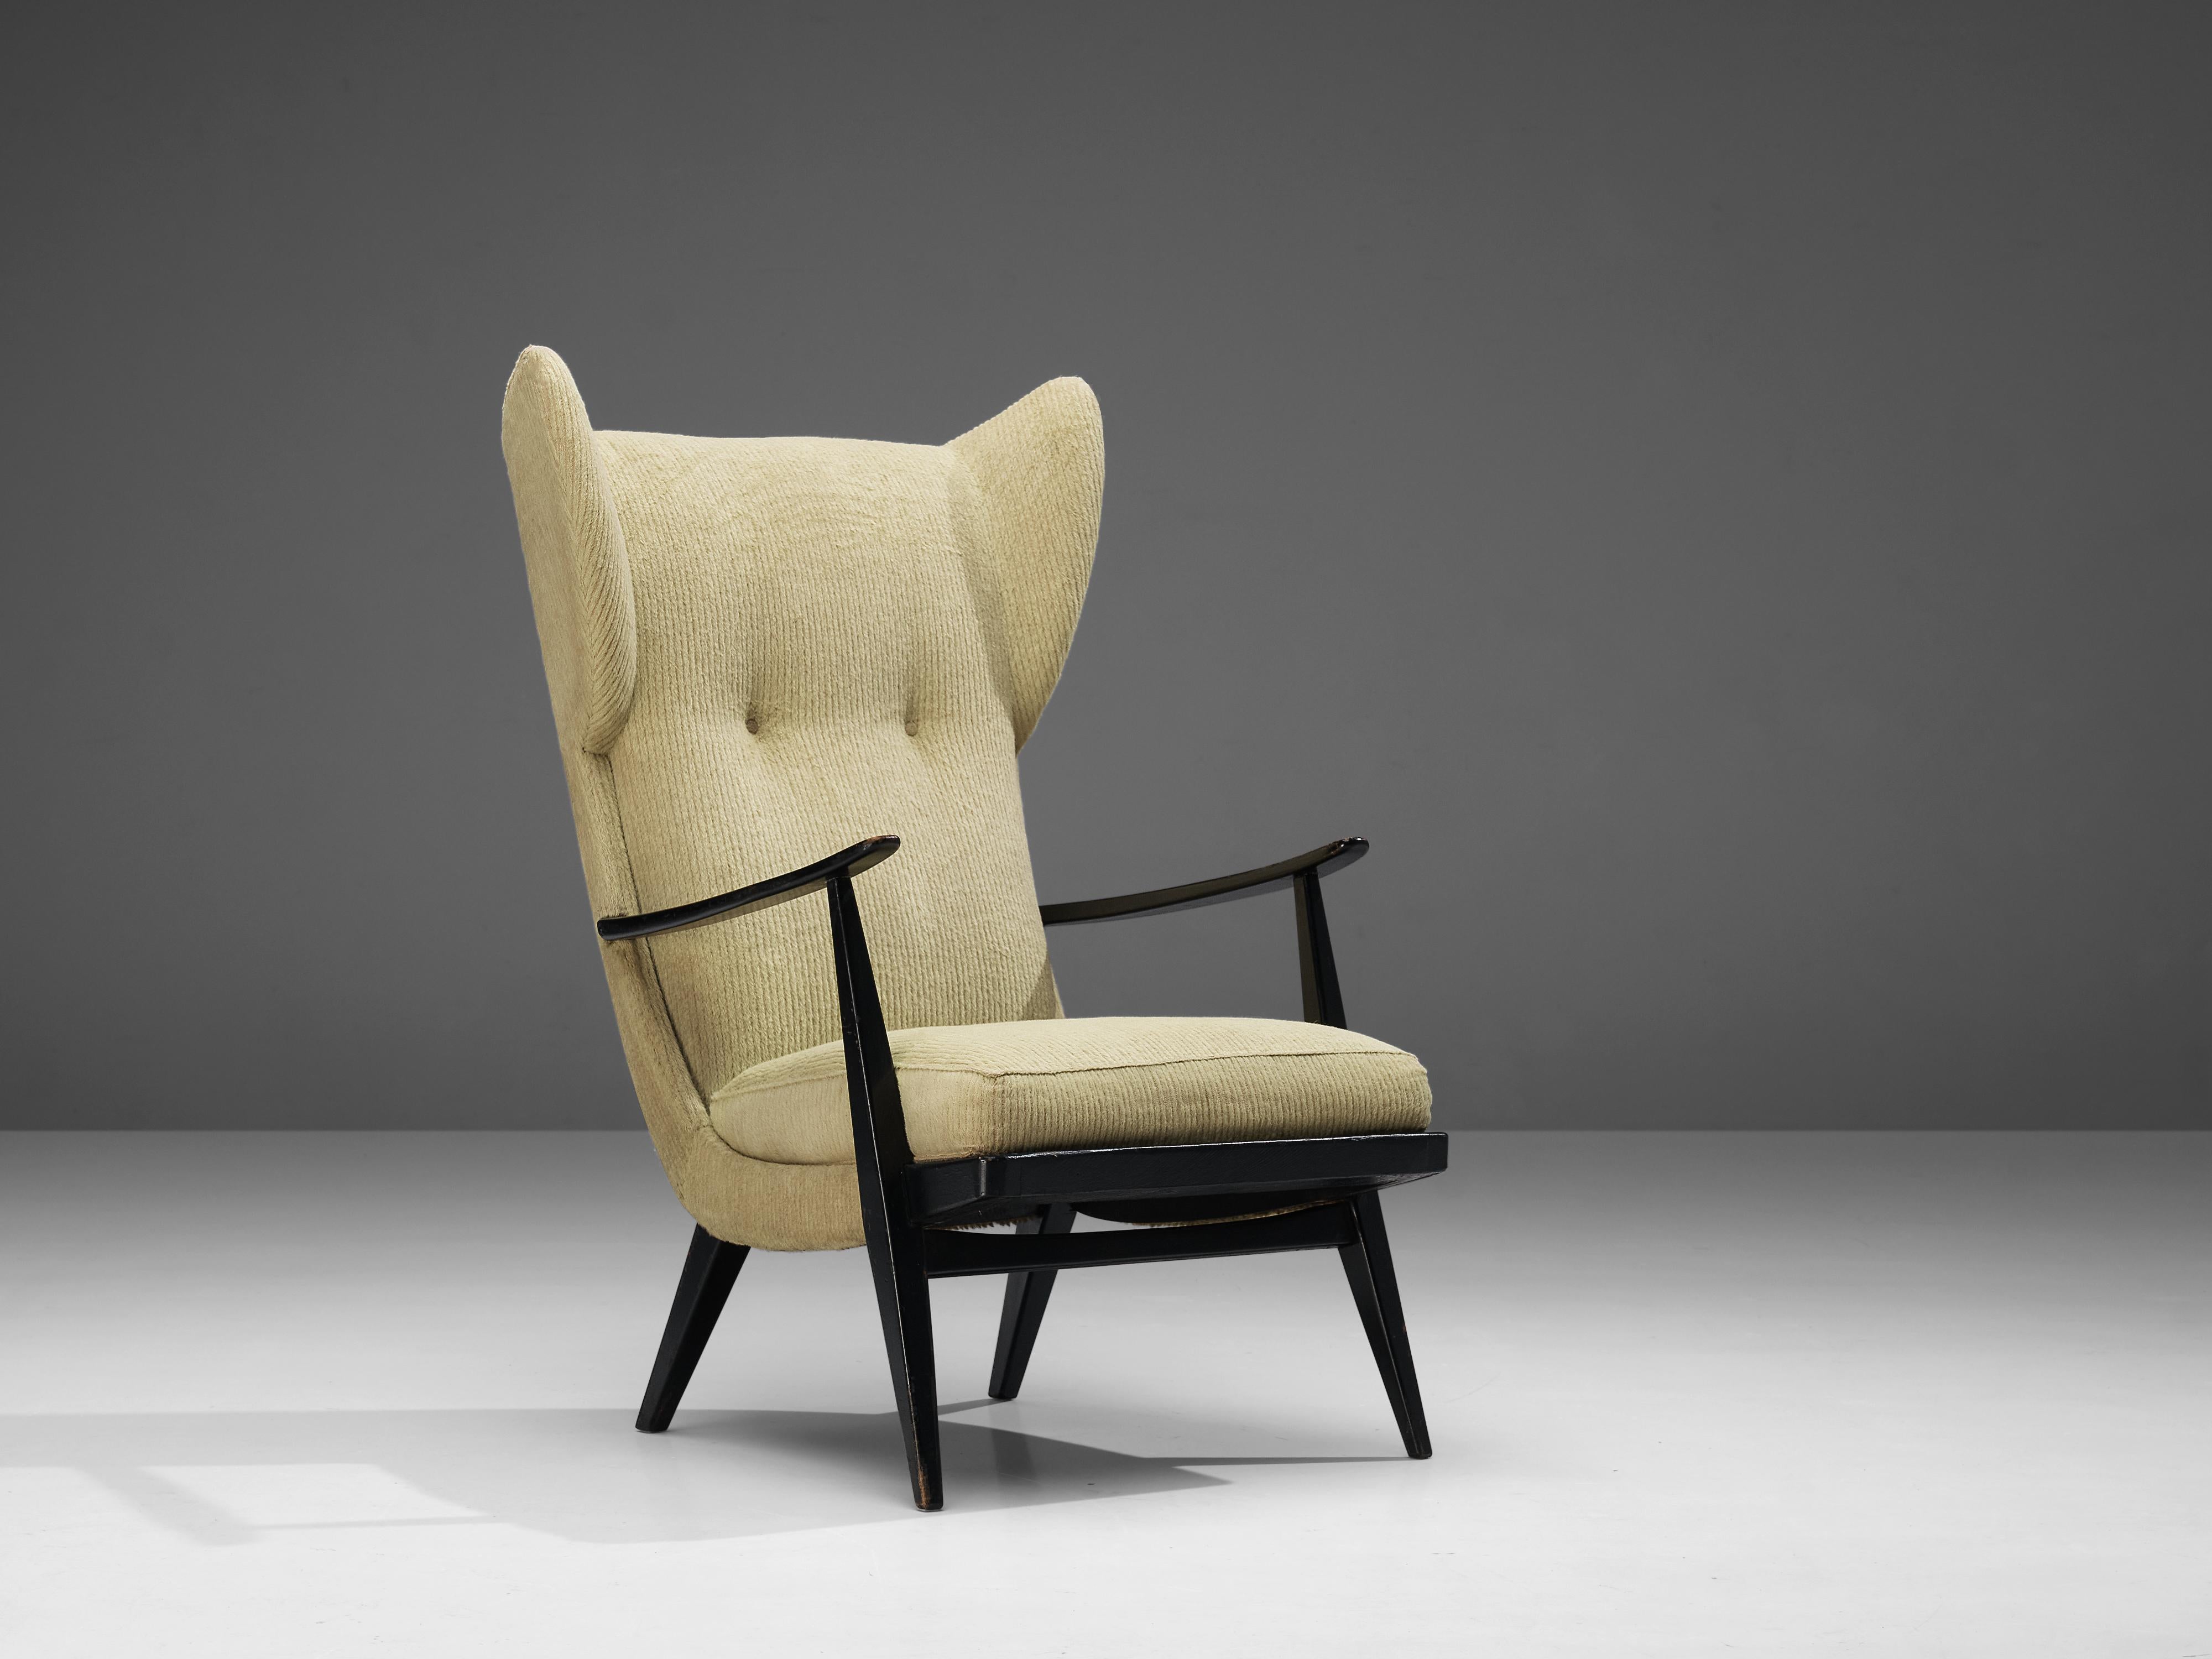 Wingback chair, fabric, stained wood, Denmark, 1950s

Danish wingback chair with elegant armrests in dark stained wood. The design of the frame and the tapered legs matches perfectly with the thick seat cushion and the backrest with tufted details.